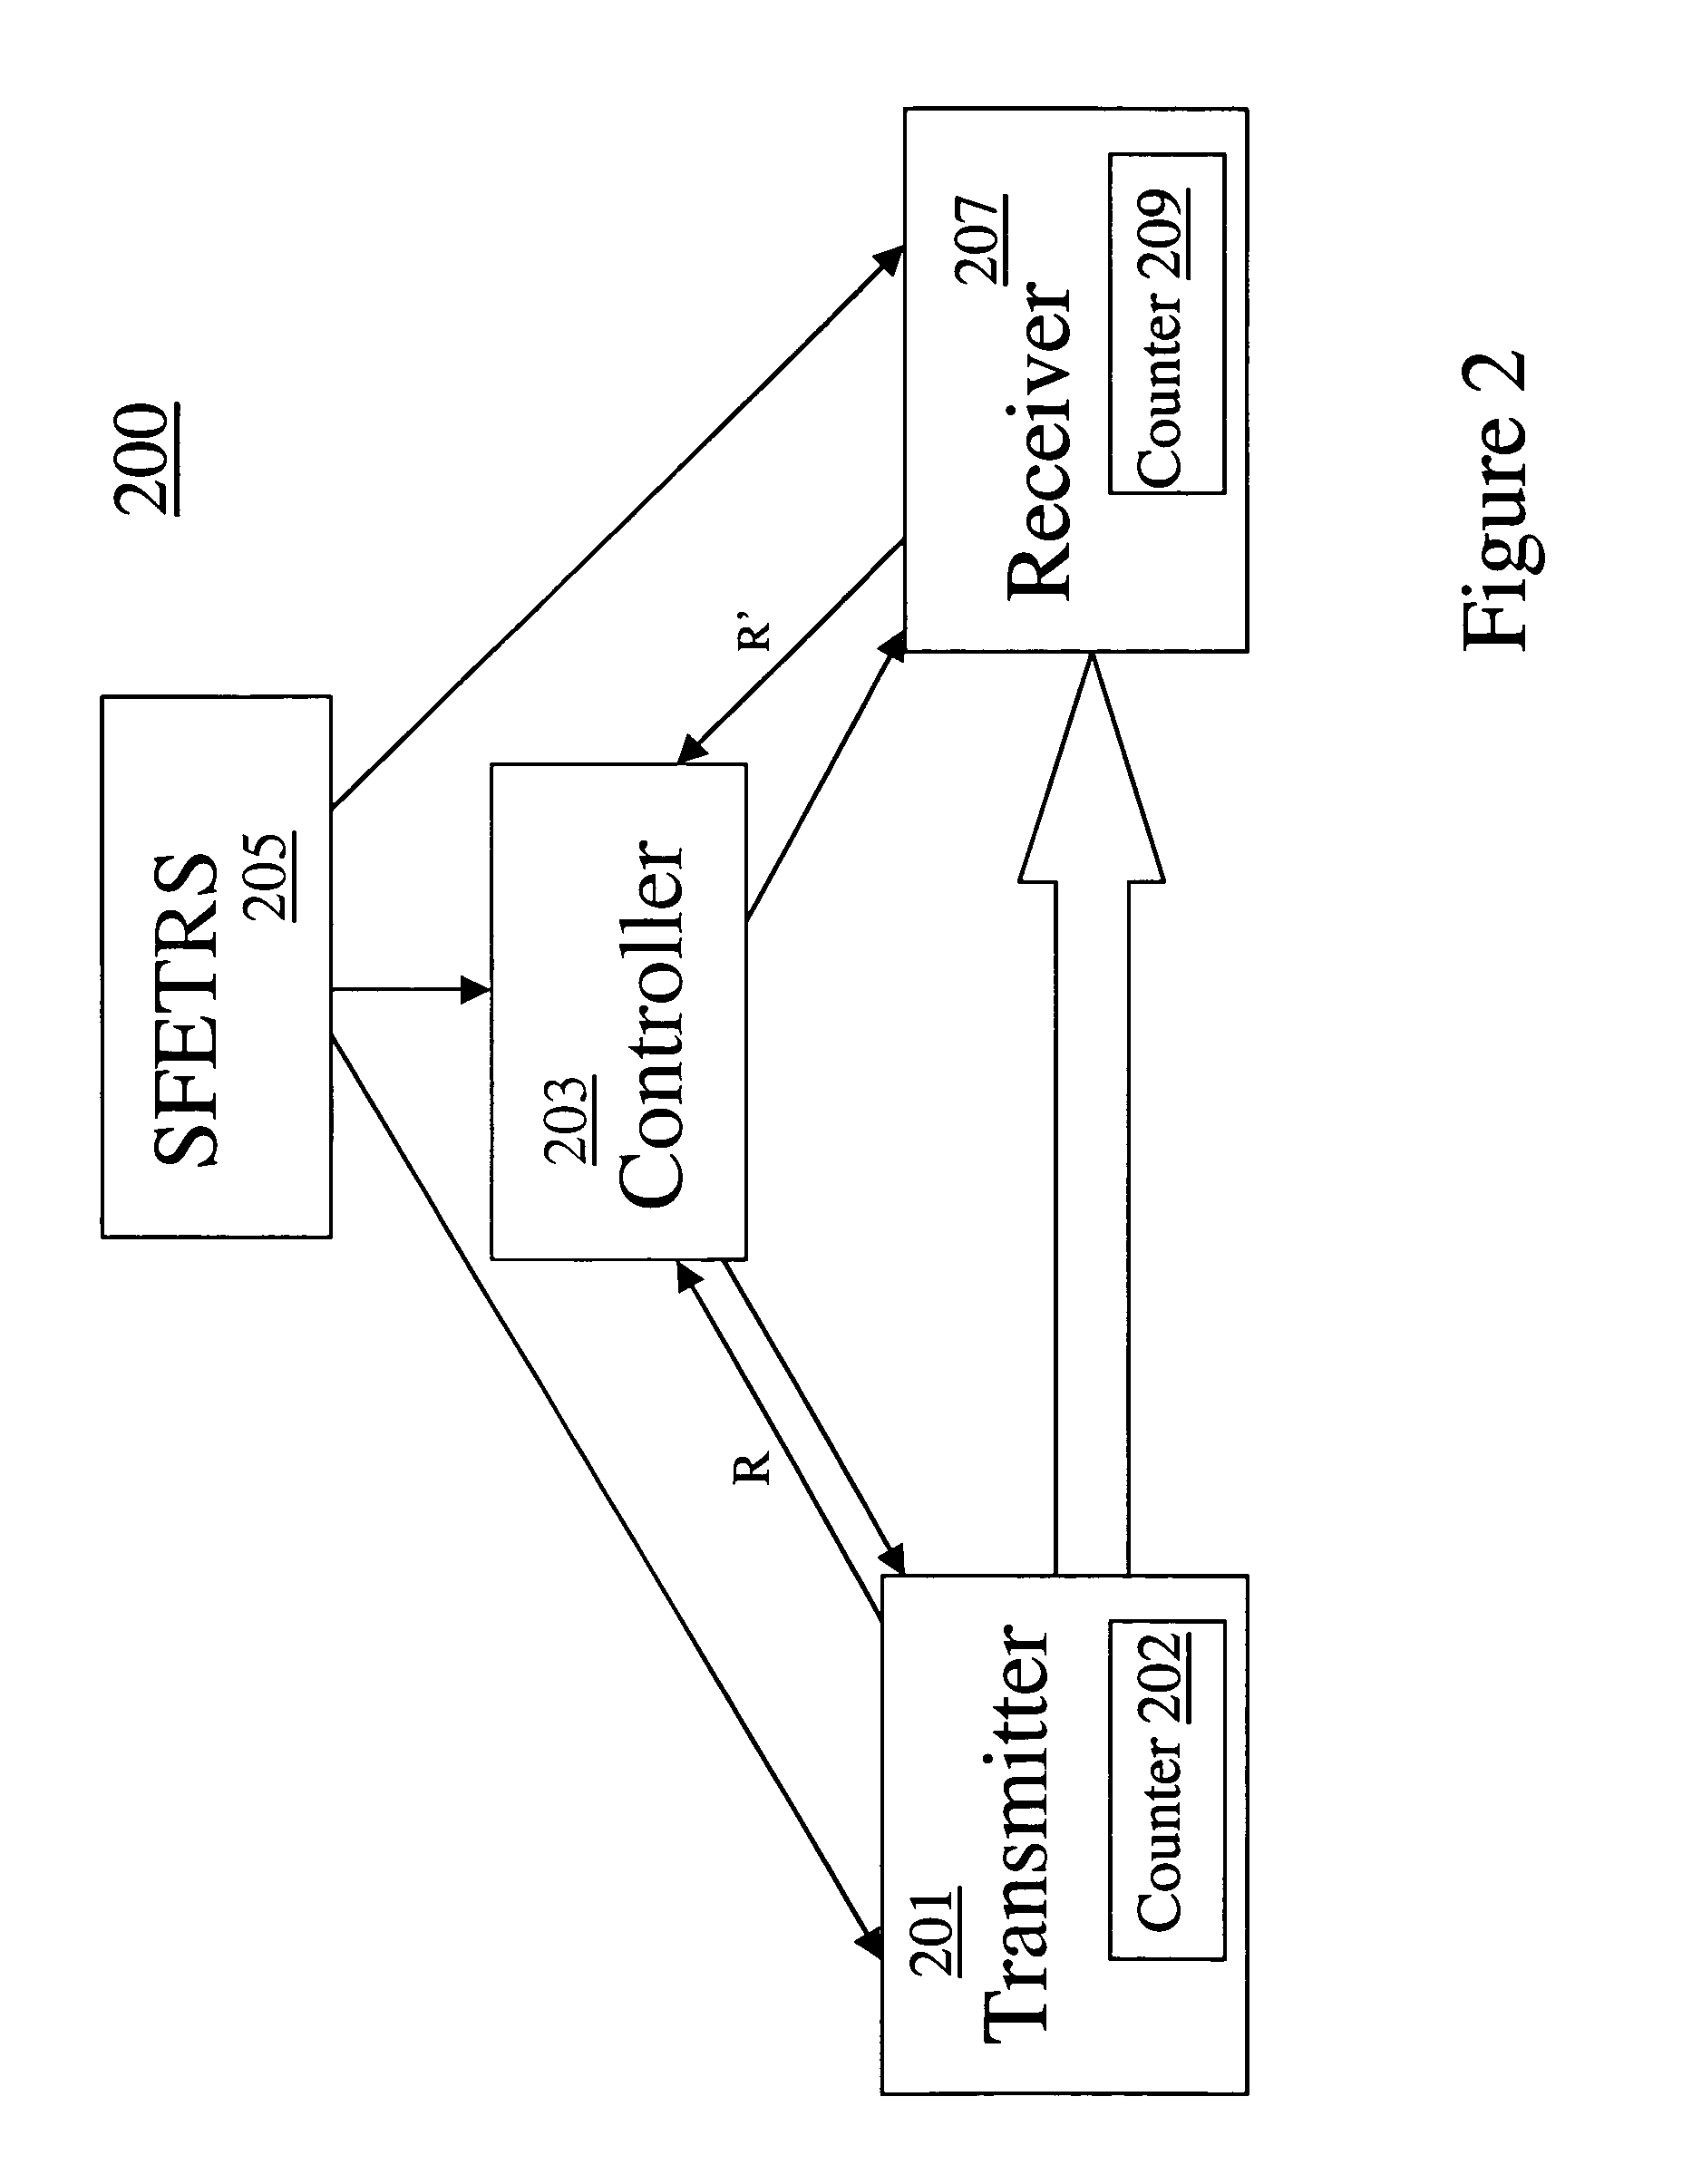 Methods and systems for effecting transmitter and receiver synchronization between a transmitter and a receiver of a transmitter/receiver network